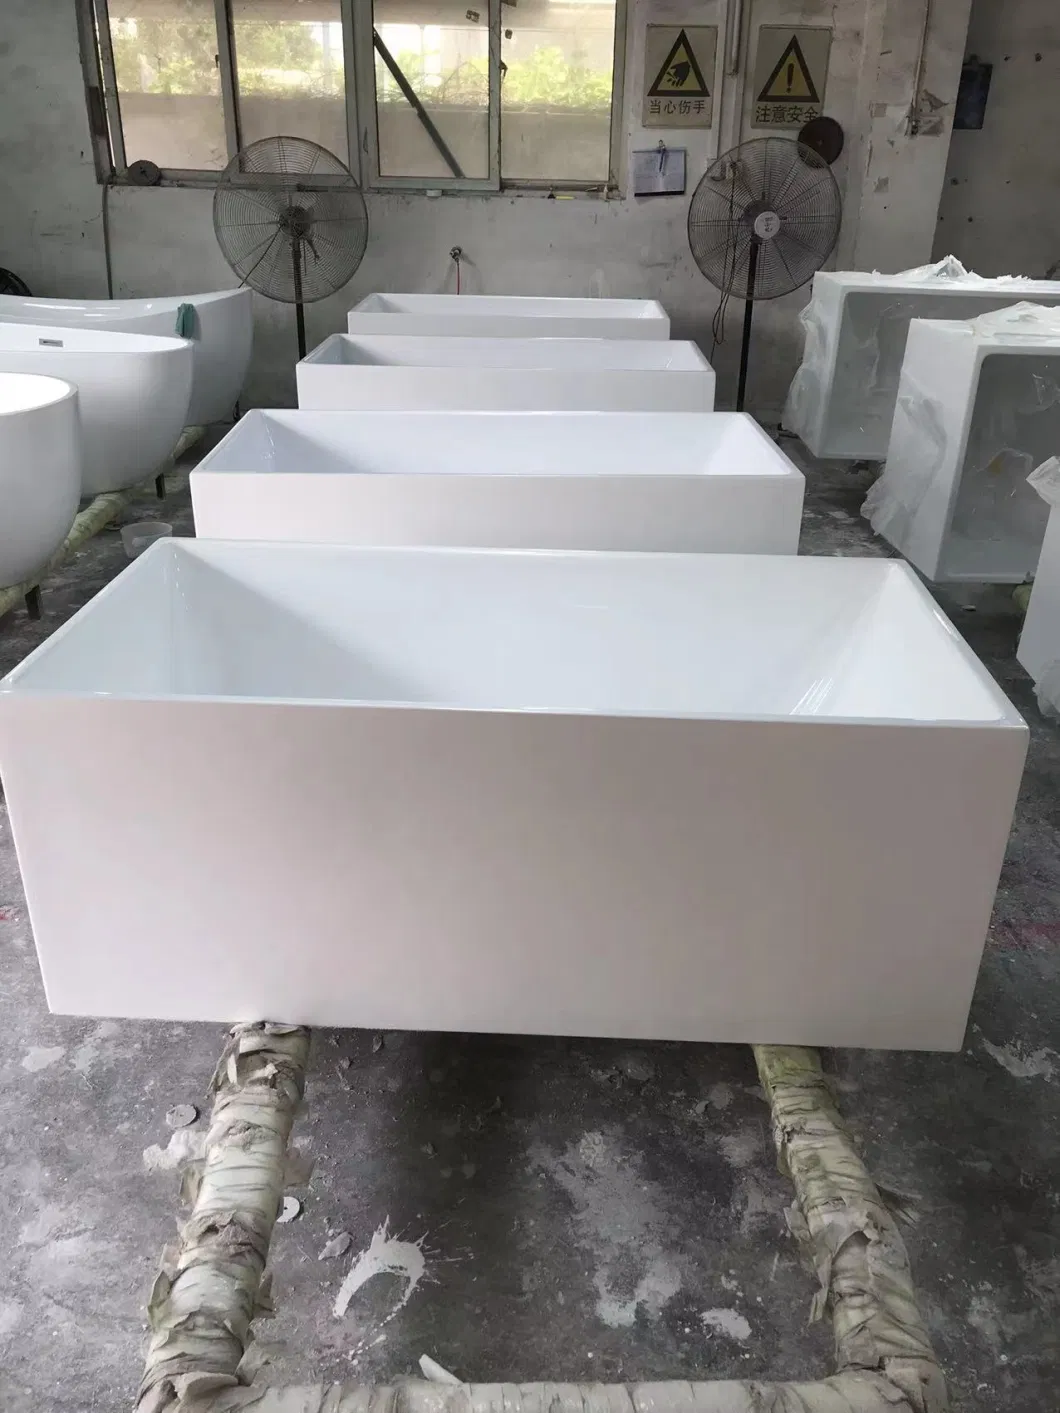 Customized Round Embedded Bath Tubs Drop-in Bathtubs with Big Waterfall Soaking with LED Light Bathtub Whirlpool Massage Dx3003